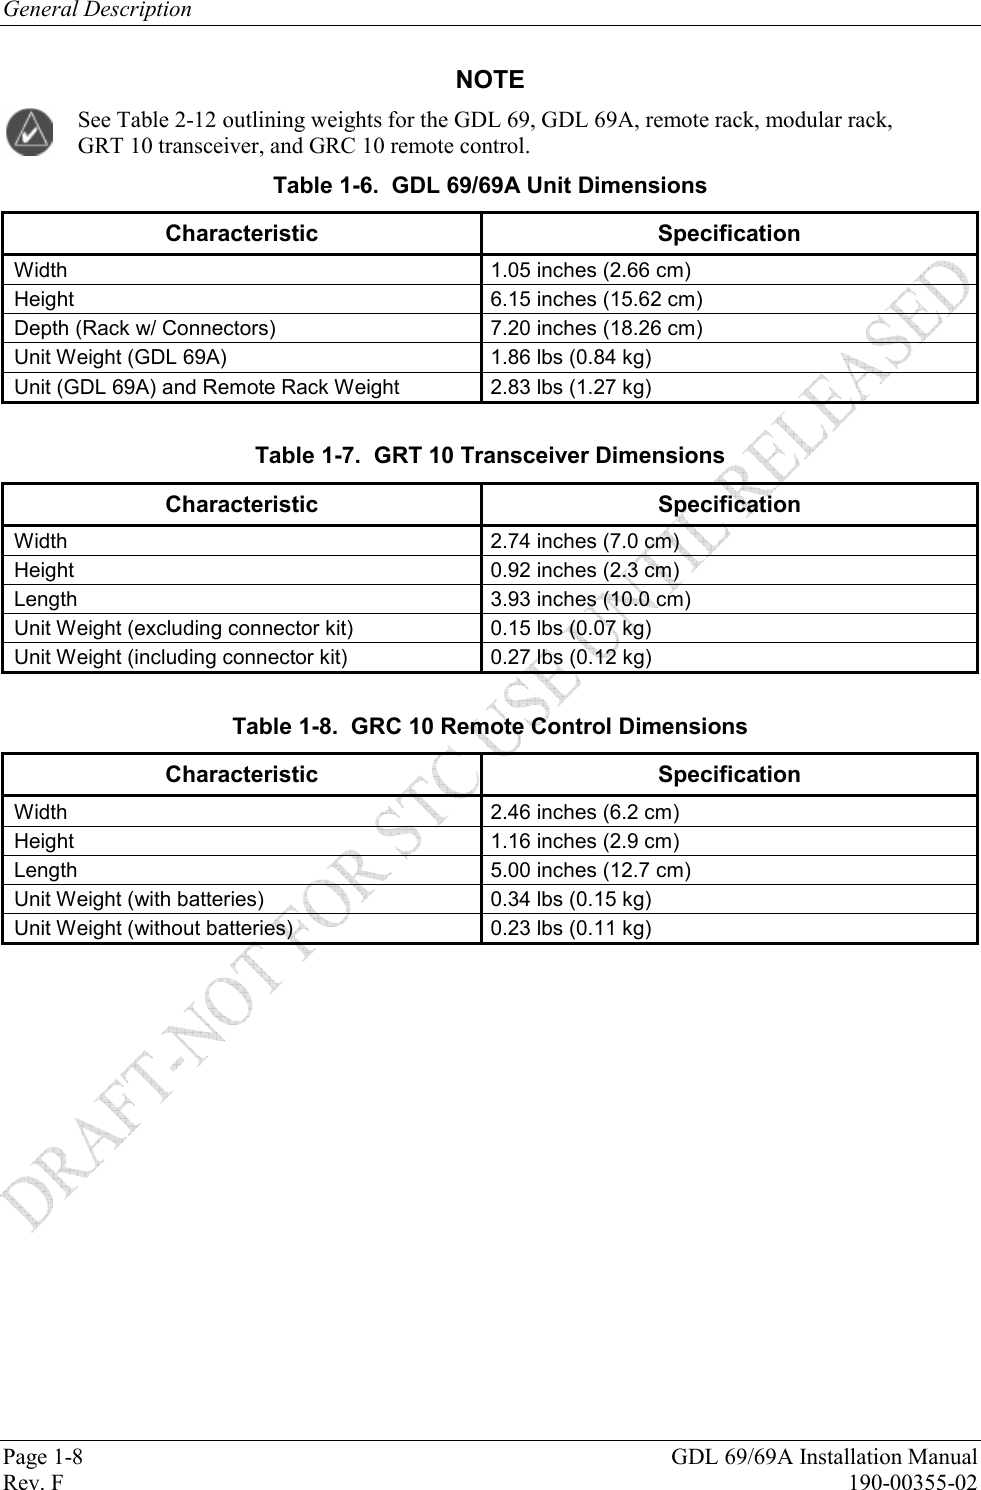 General Description Page 1-8  GDL 69/69A Installation Manual Rev. F  190-00355-02 NOTE See Table 2-12 outlining weights for the GDL 69, GDL 69A, remote rack, modular rack, GRT 10 transceiver, and GRC 10 remote control. Table 1-6.  GDL 69/69A Unit Dimensions Characteristic Specification Width  1.05 inches (2.66 cm) Height  6.15 inches (15.62 cm) Depth (Rack w/ Connectors)  7.20 inches (18.26 cm) Unit Weight (GDL 69A)  1.86 lbs (0.84 kg) Unit (GDL 69A) and Remote Rack Weight  2.83 lbs (1.27 kg)  Table 1-7.  GRT 10 Transceiver Dimensions Characteristic Specification  Width   2.74 inches (7.0 cm) Height  0.92 inches (2.3 cm) Length  3.93 inches (10.0 cm) Unit Weight (excluding connector kit)  0.15 lbs (0.07 kg) Unit Weight (including connector kit)  0.27 lbs (0.12 kg)  Table 1-8.  GRC 10 Remote Control Dimensions Characteristic Specification  Width  2.46 inches (6.2 cm) Height  1.16 inches (2.9 cm) Length  5.00 inches (12.7 cm) Unit Weight (with batteries)  0.34 lbs (0.15 kg) Unit Weight (without batteries)  0.23 lbs (0.11 kg)  